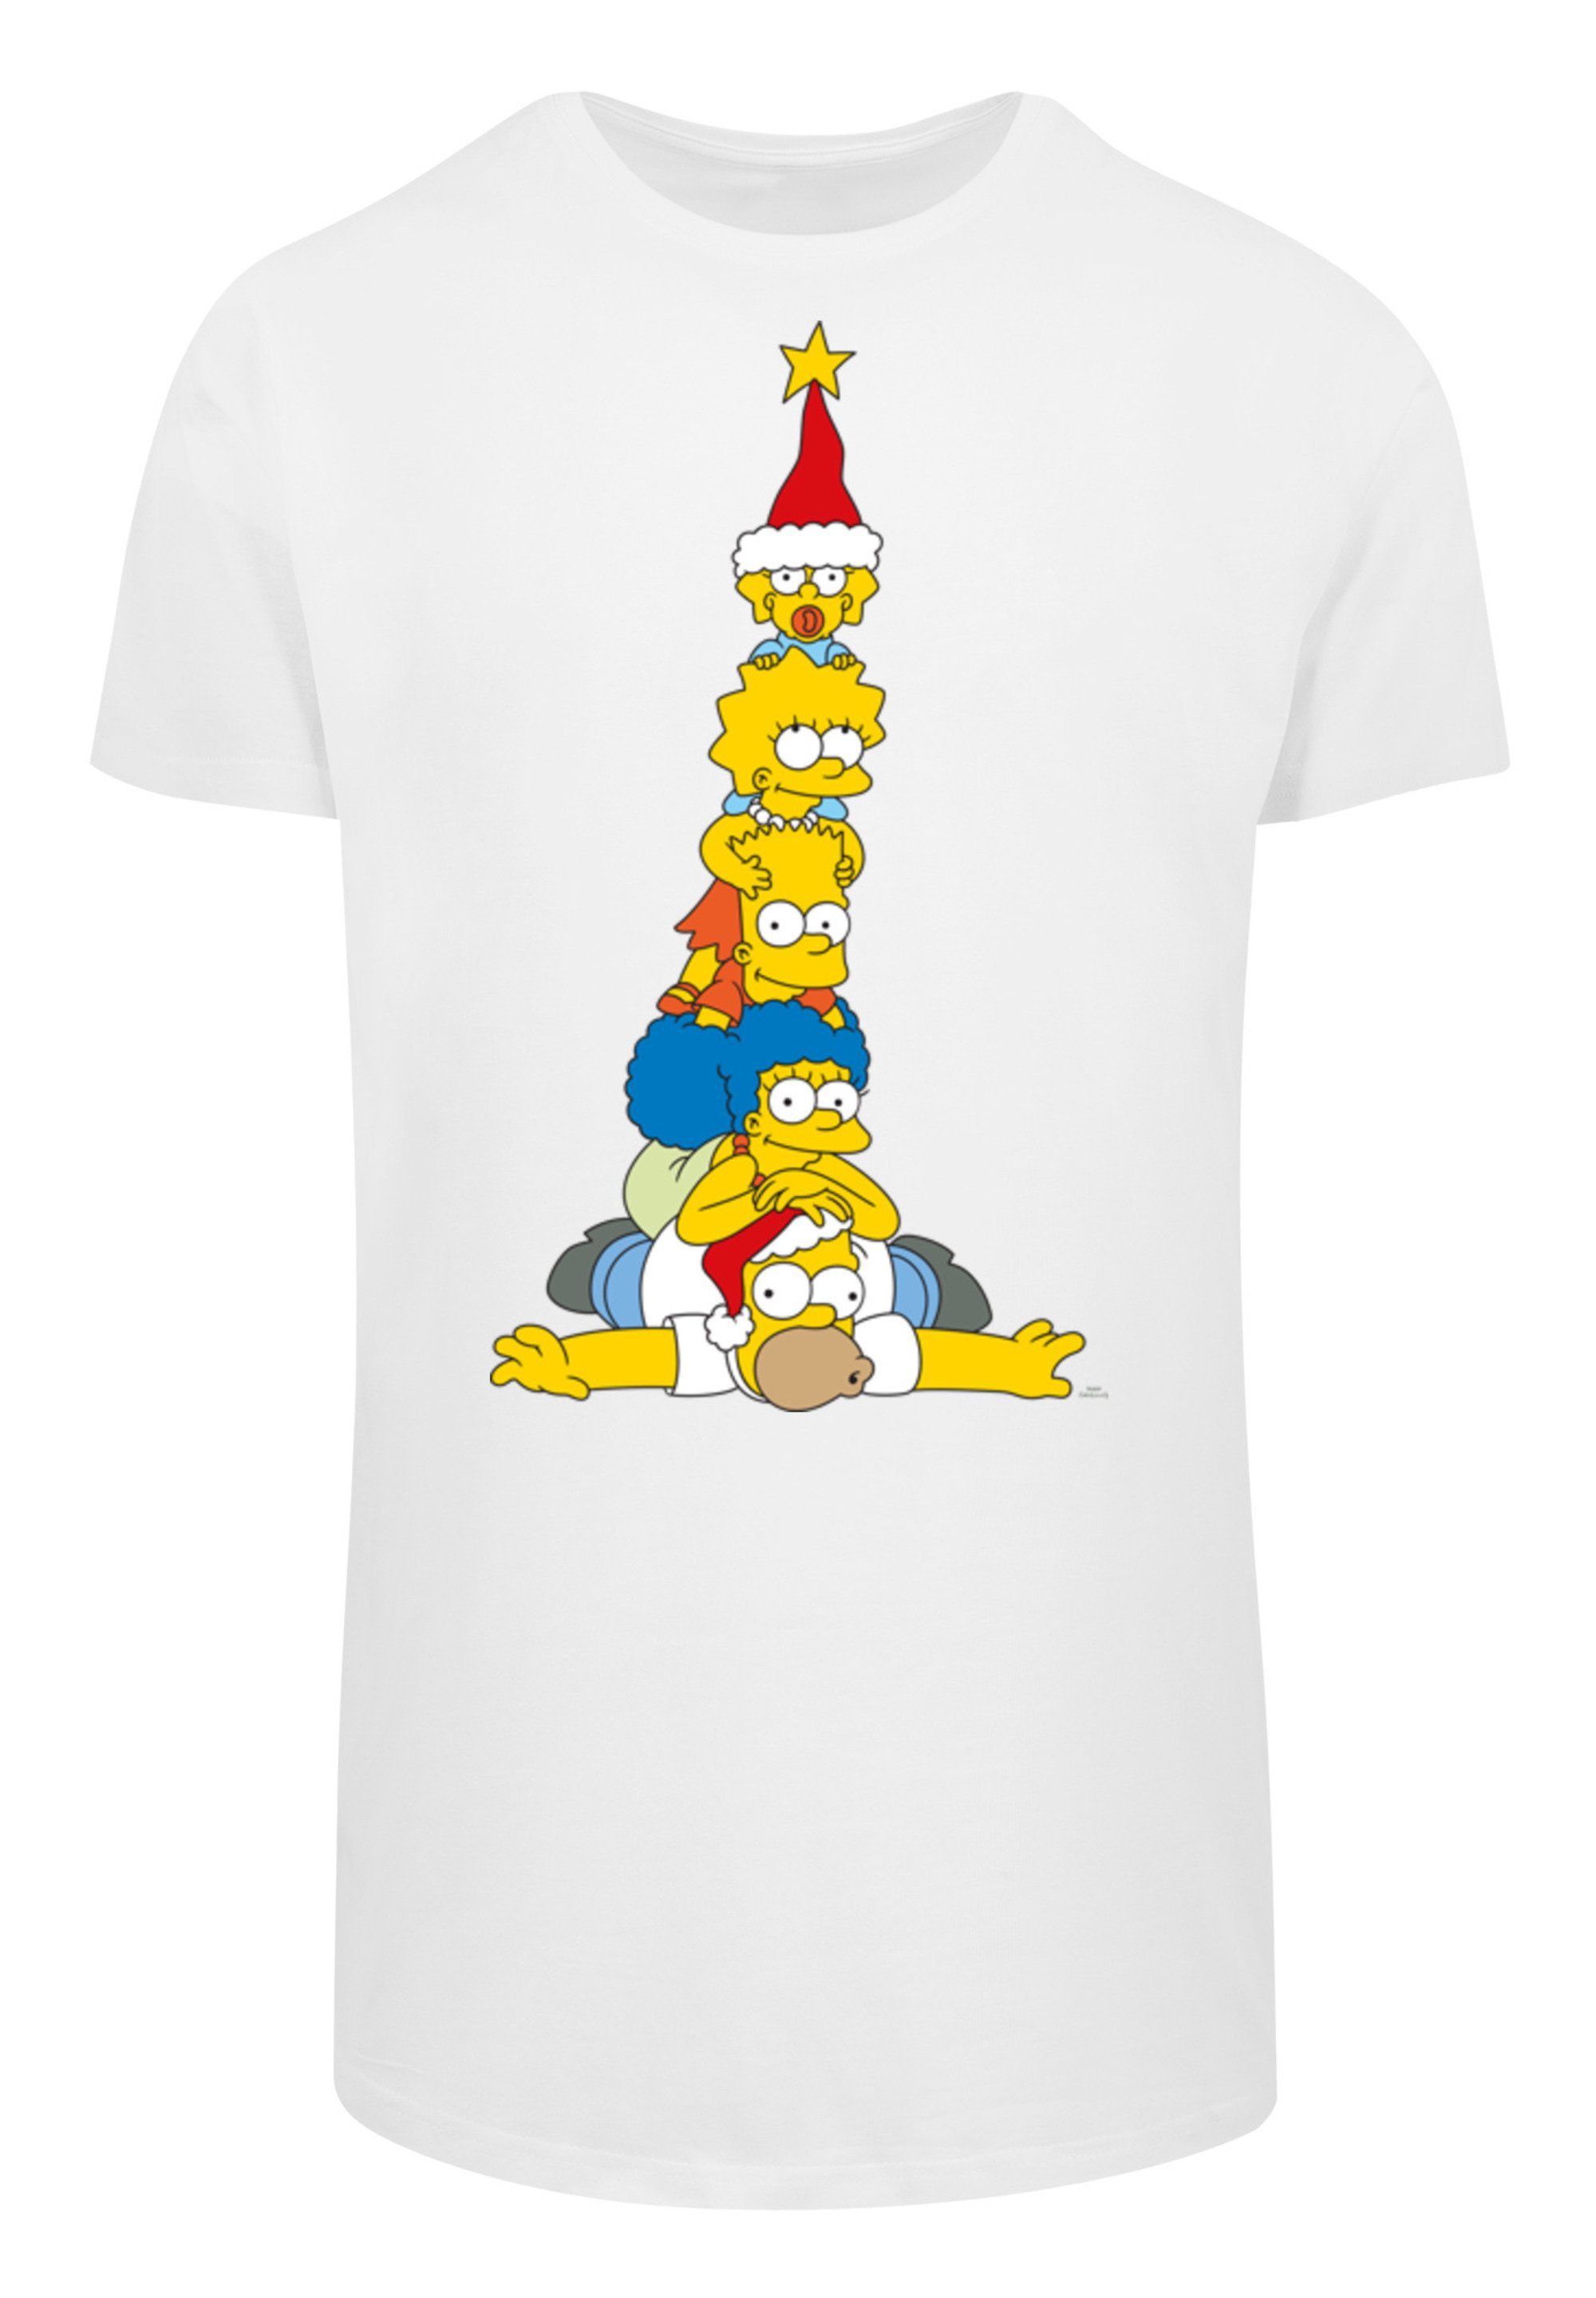 Simpsons T-Shirt weiß The Family F4NT4STIC Christmas Print Weihnachtsbaum